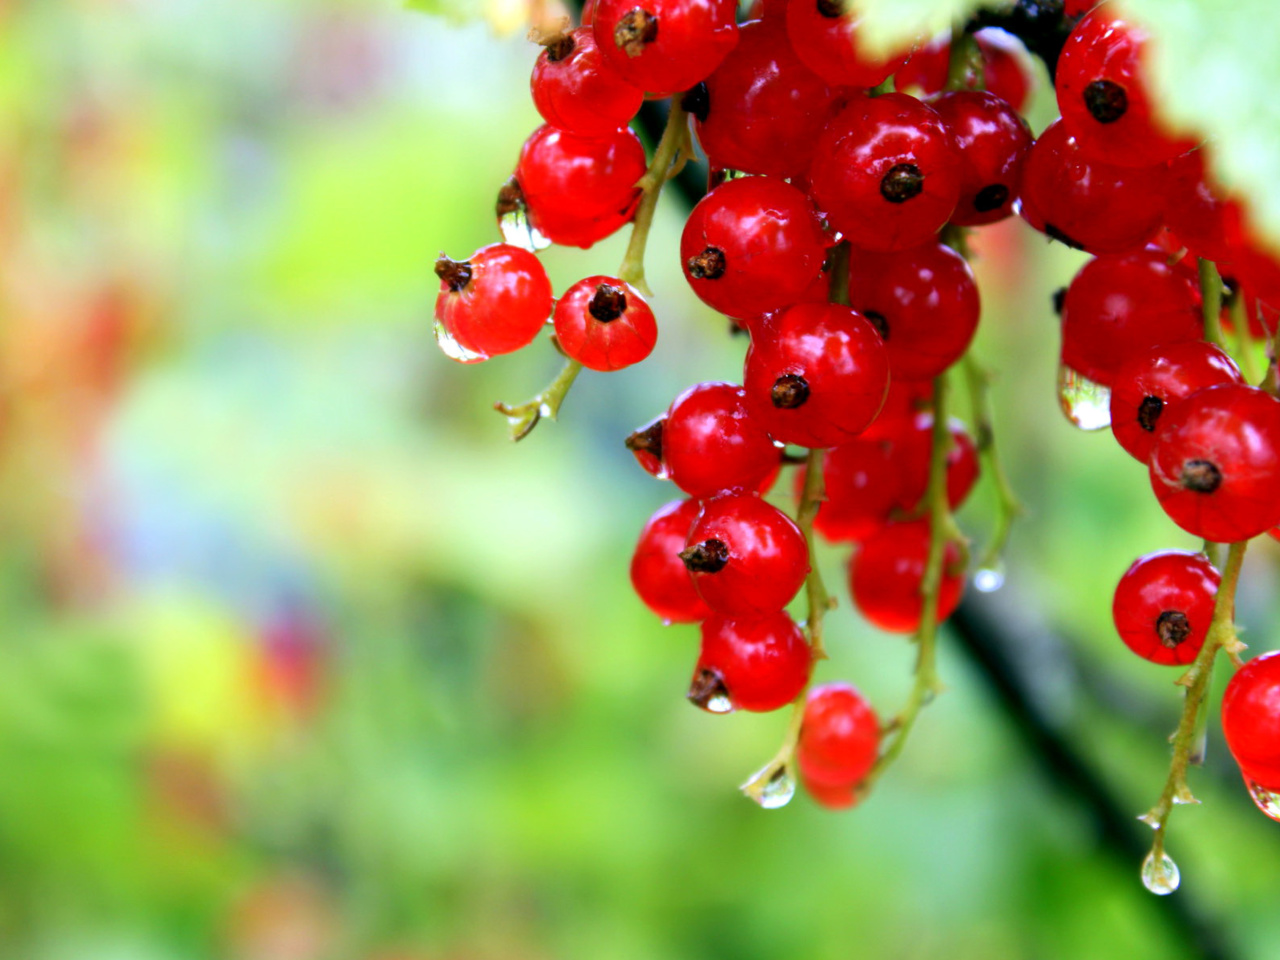 Das Red currant with Dew Wallpaper 1280x960